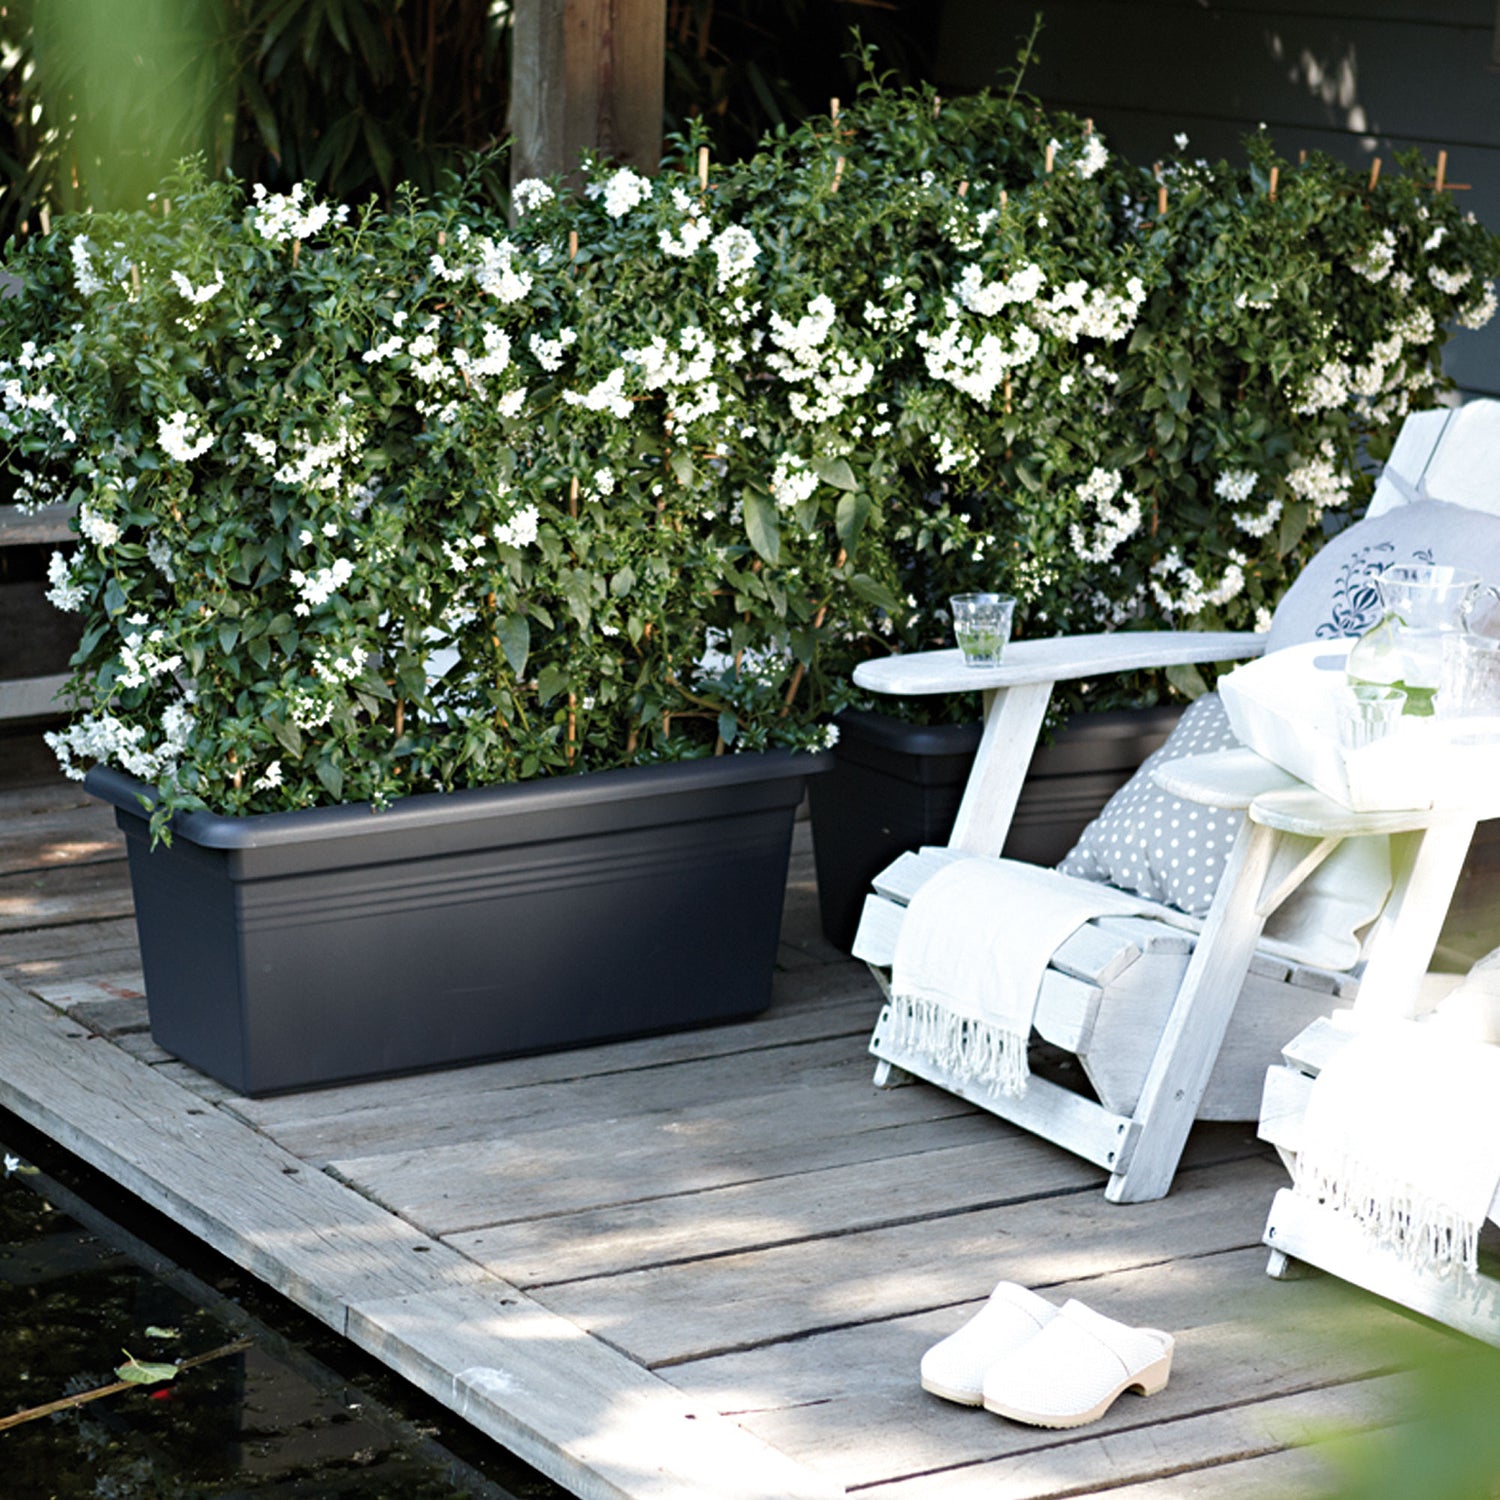 Planters and flower boxes